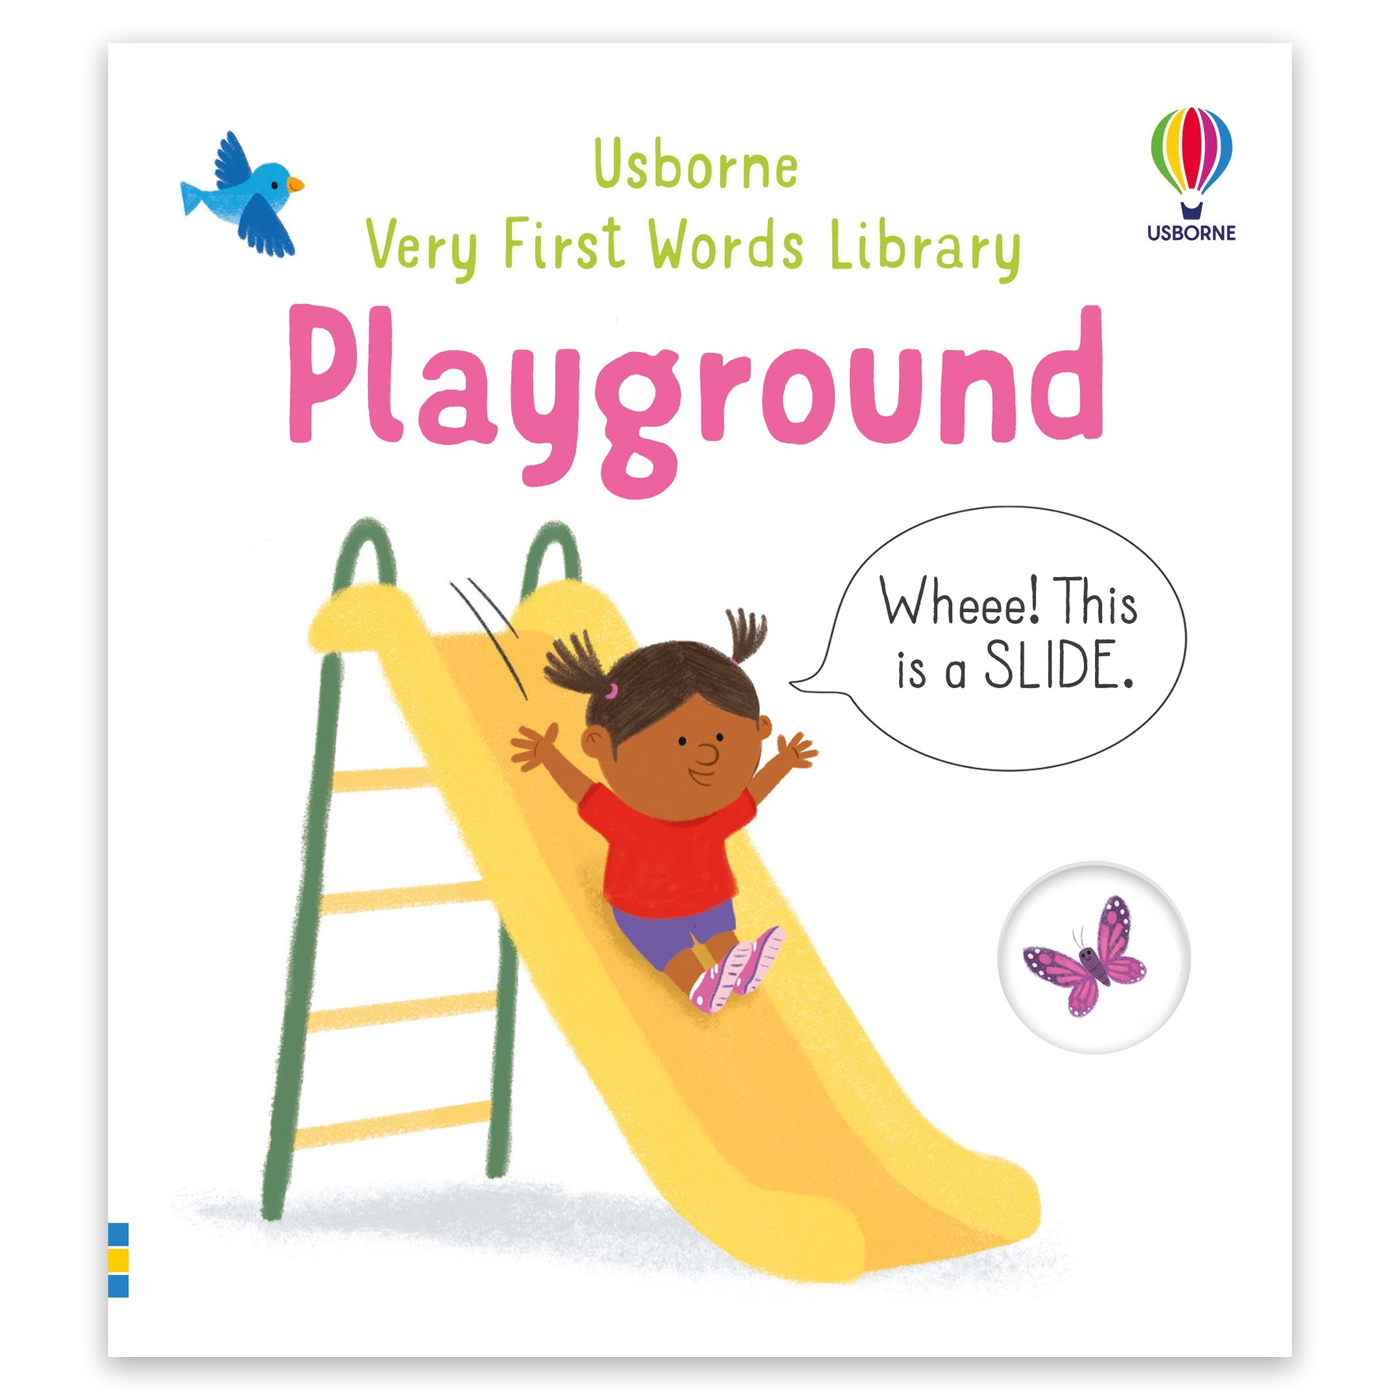  Very First Words Library: Playground